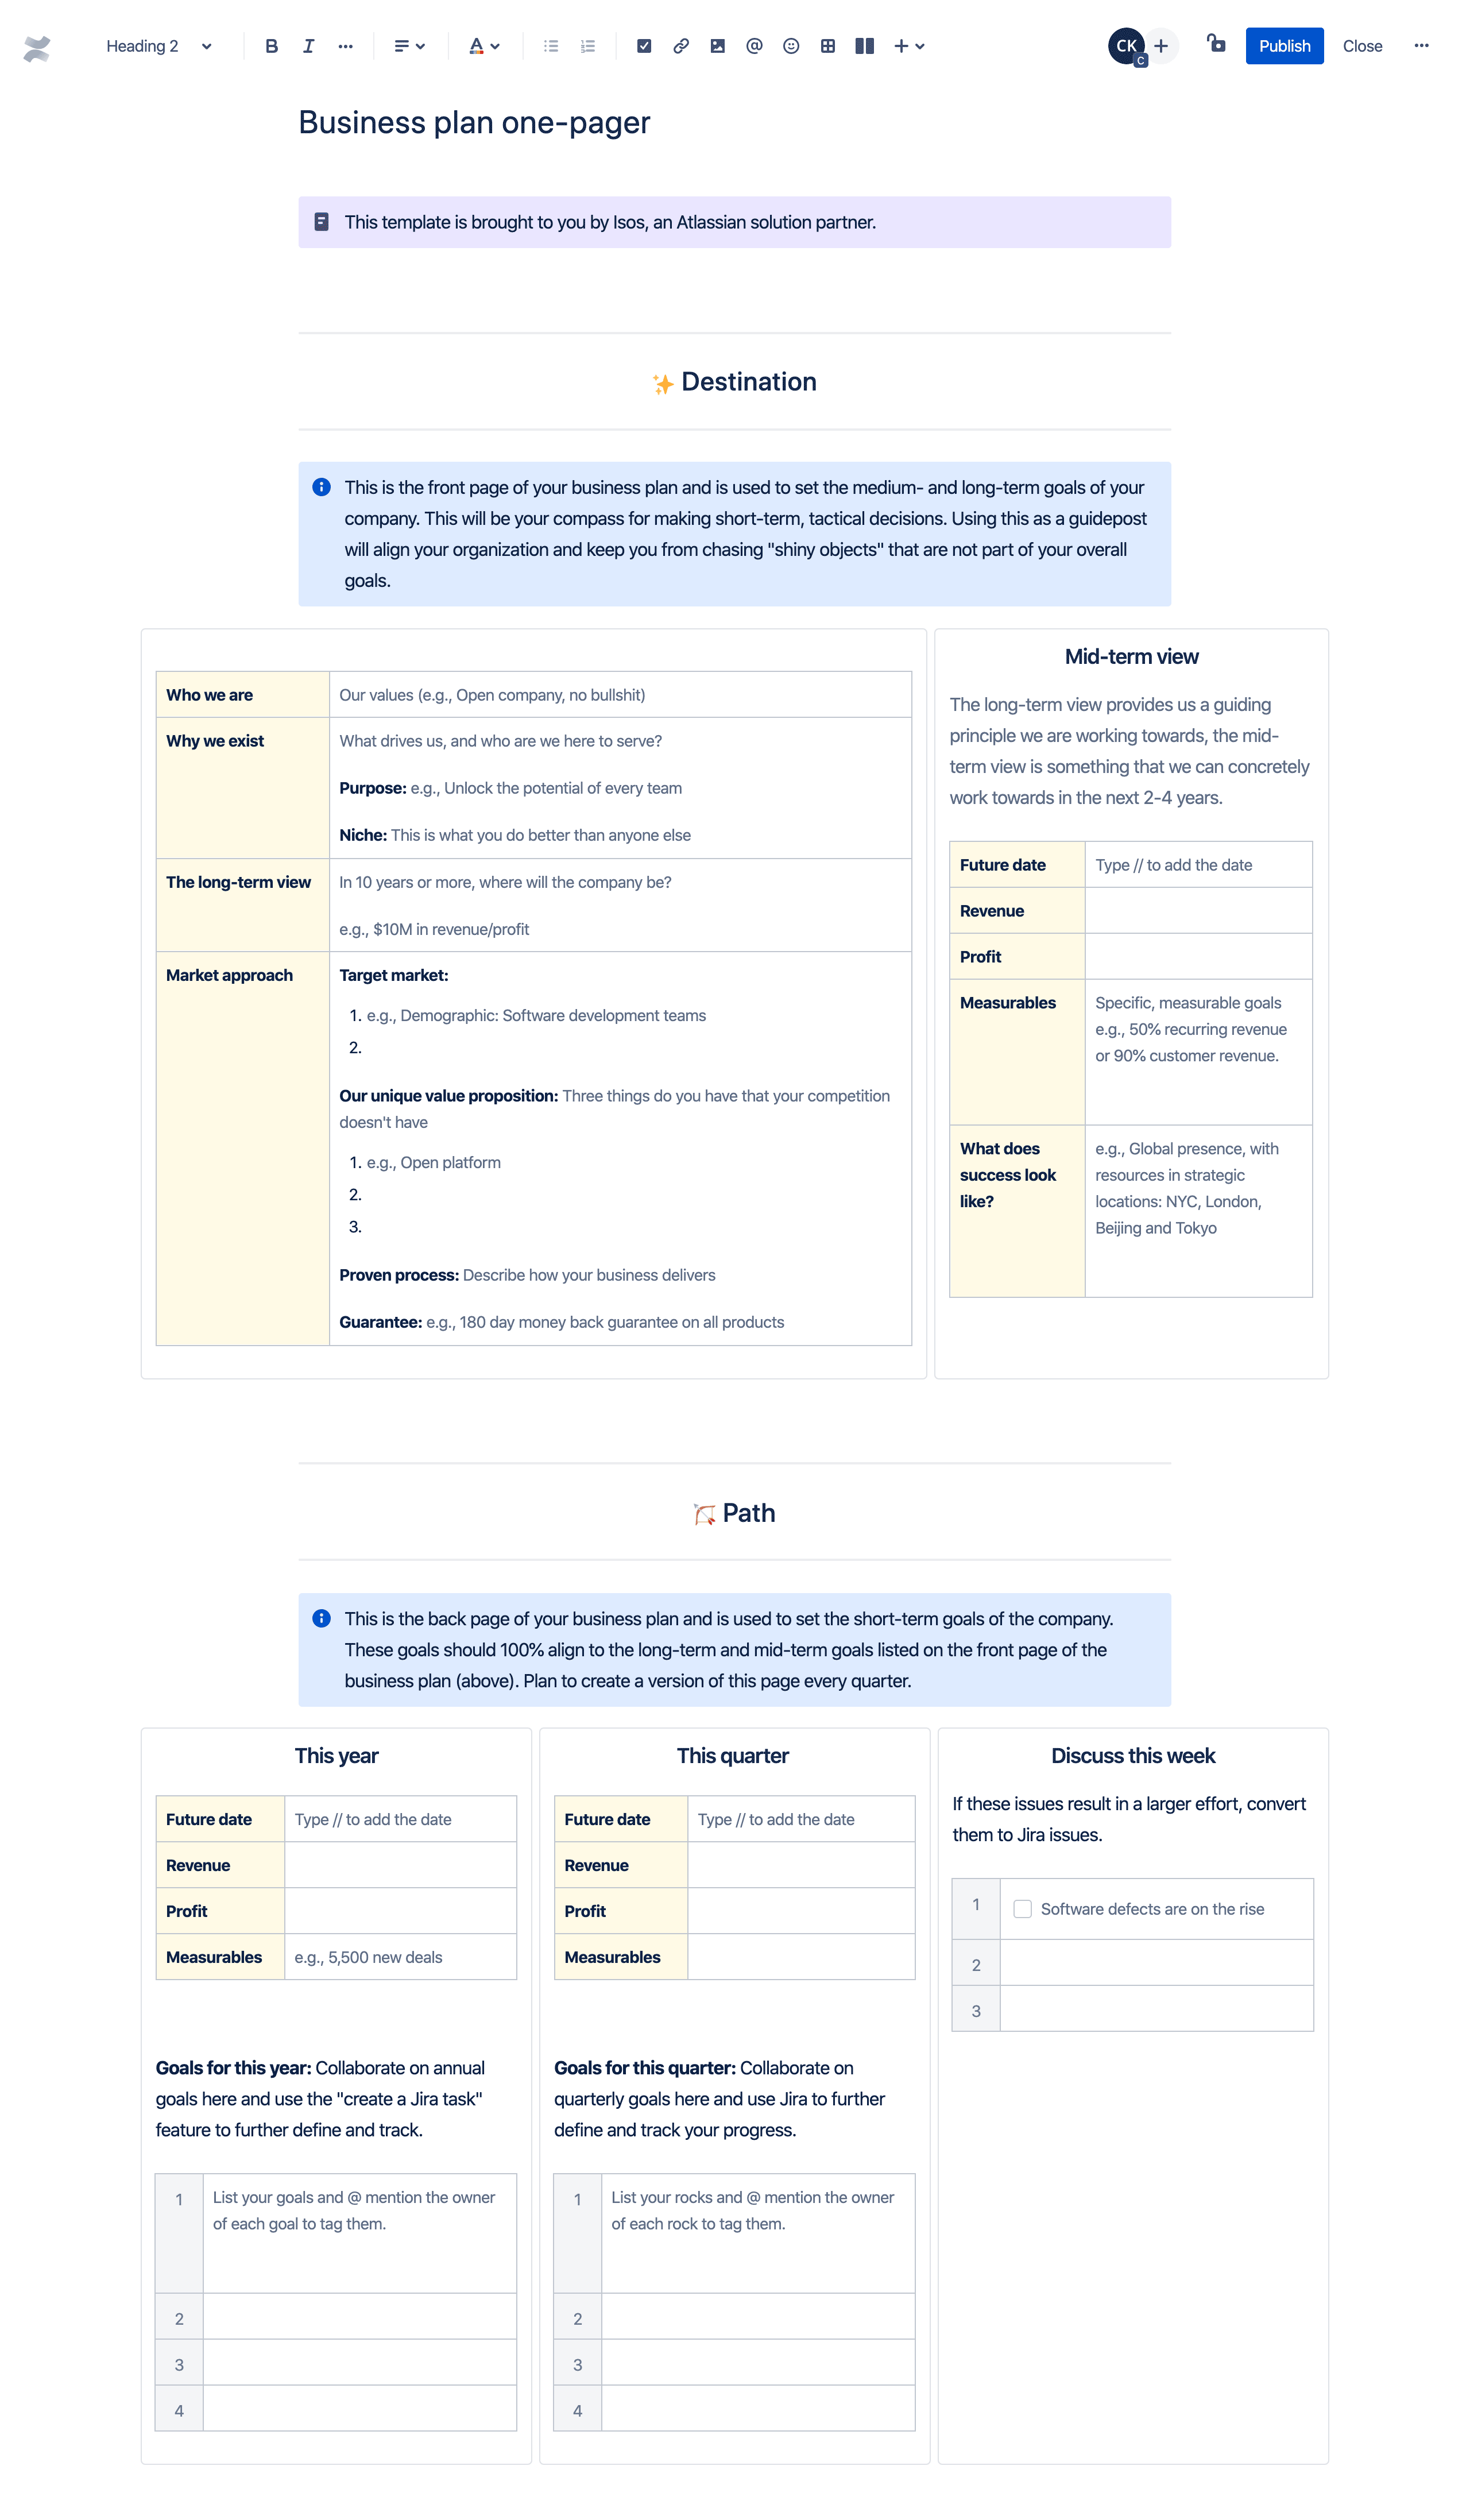 Business plan one-pager template